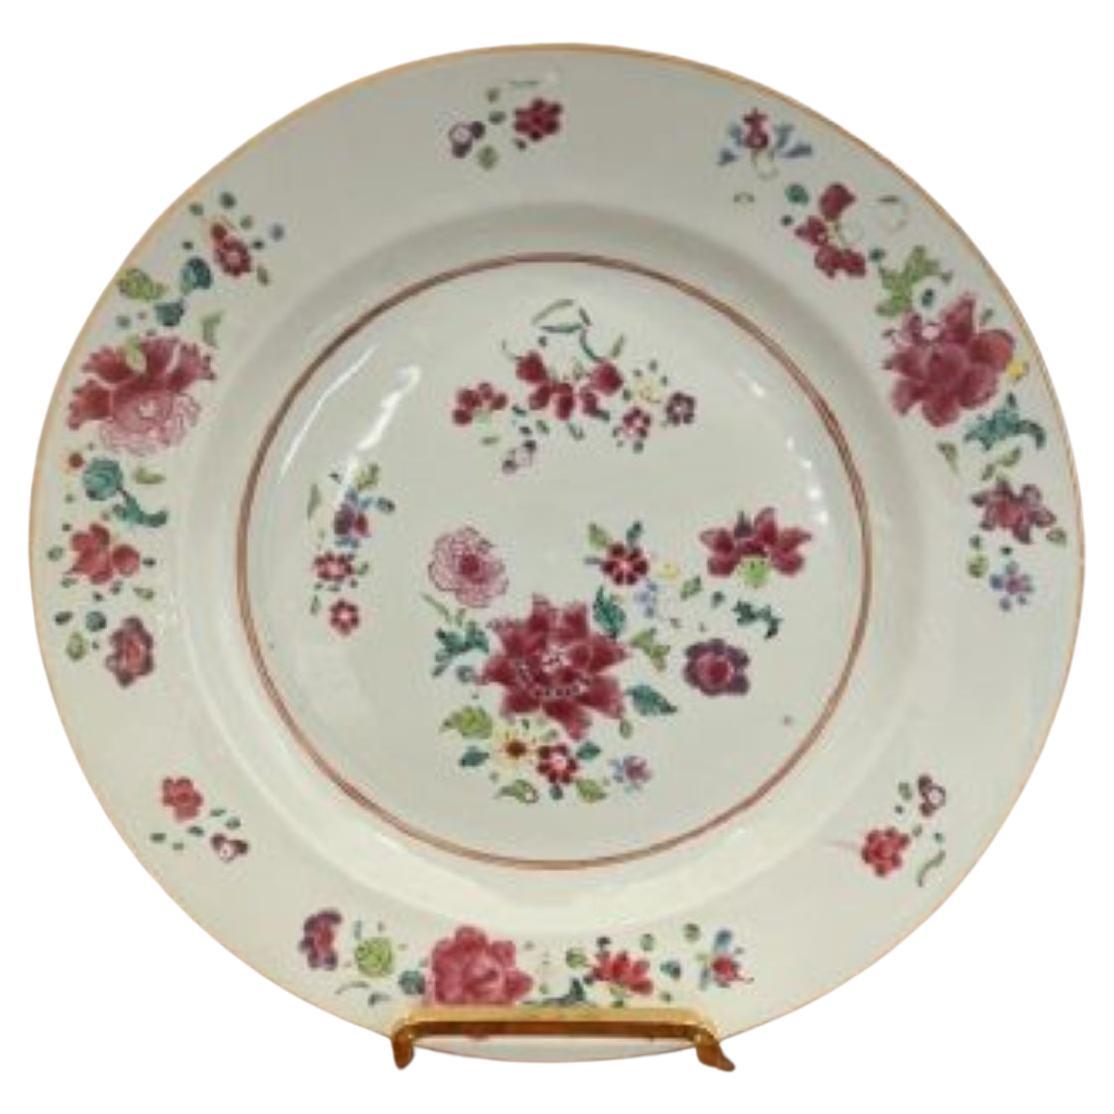 Lovely antique Chinese Famille Rose porcelain plate 